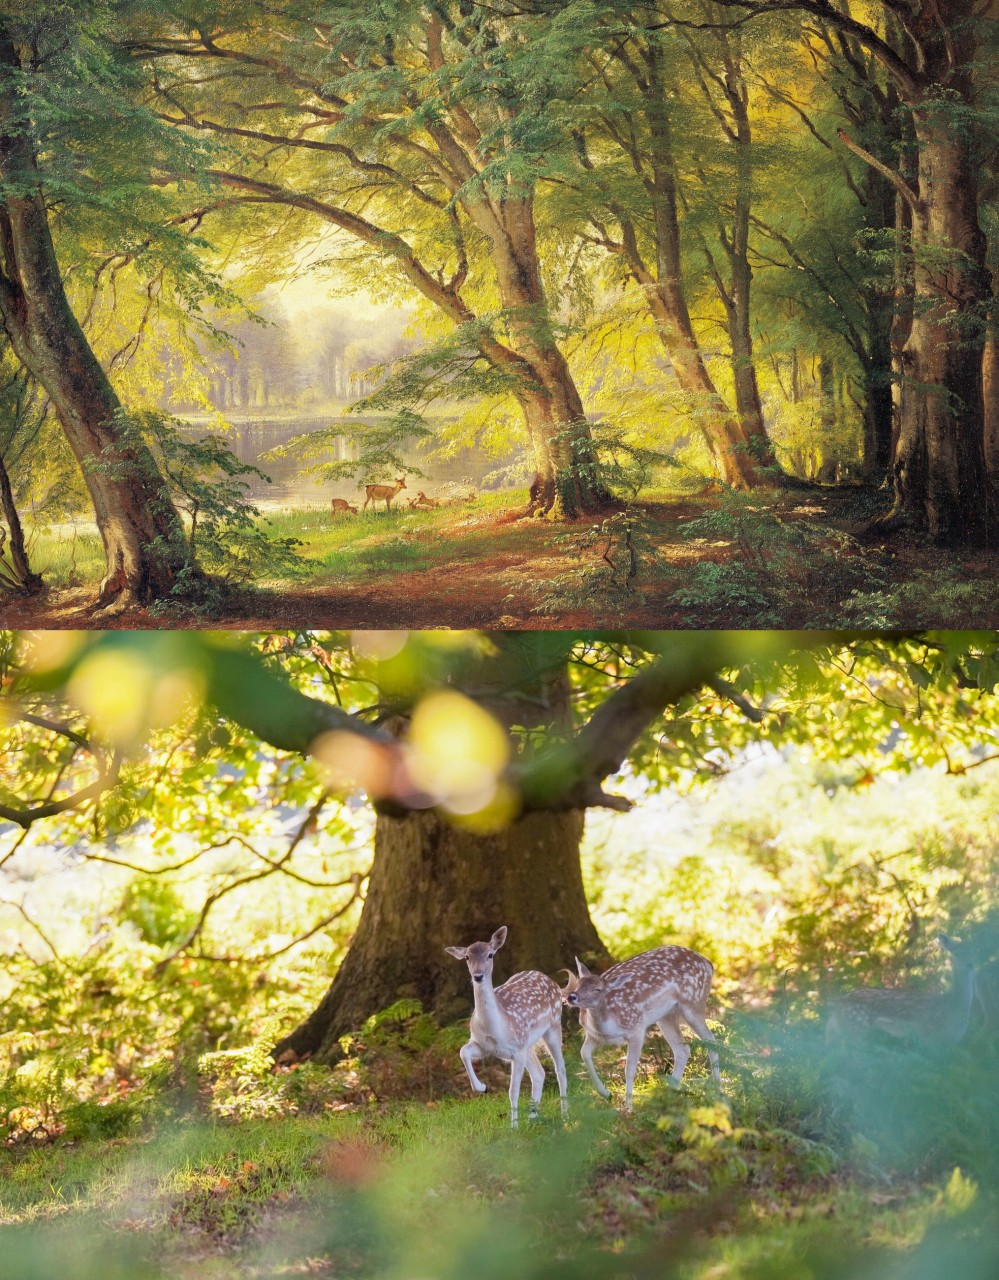 two images of deer in a summer scene; one a supposedly sentimental painting, the other a photograph